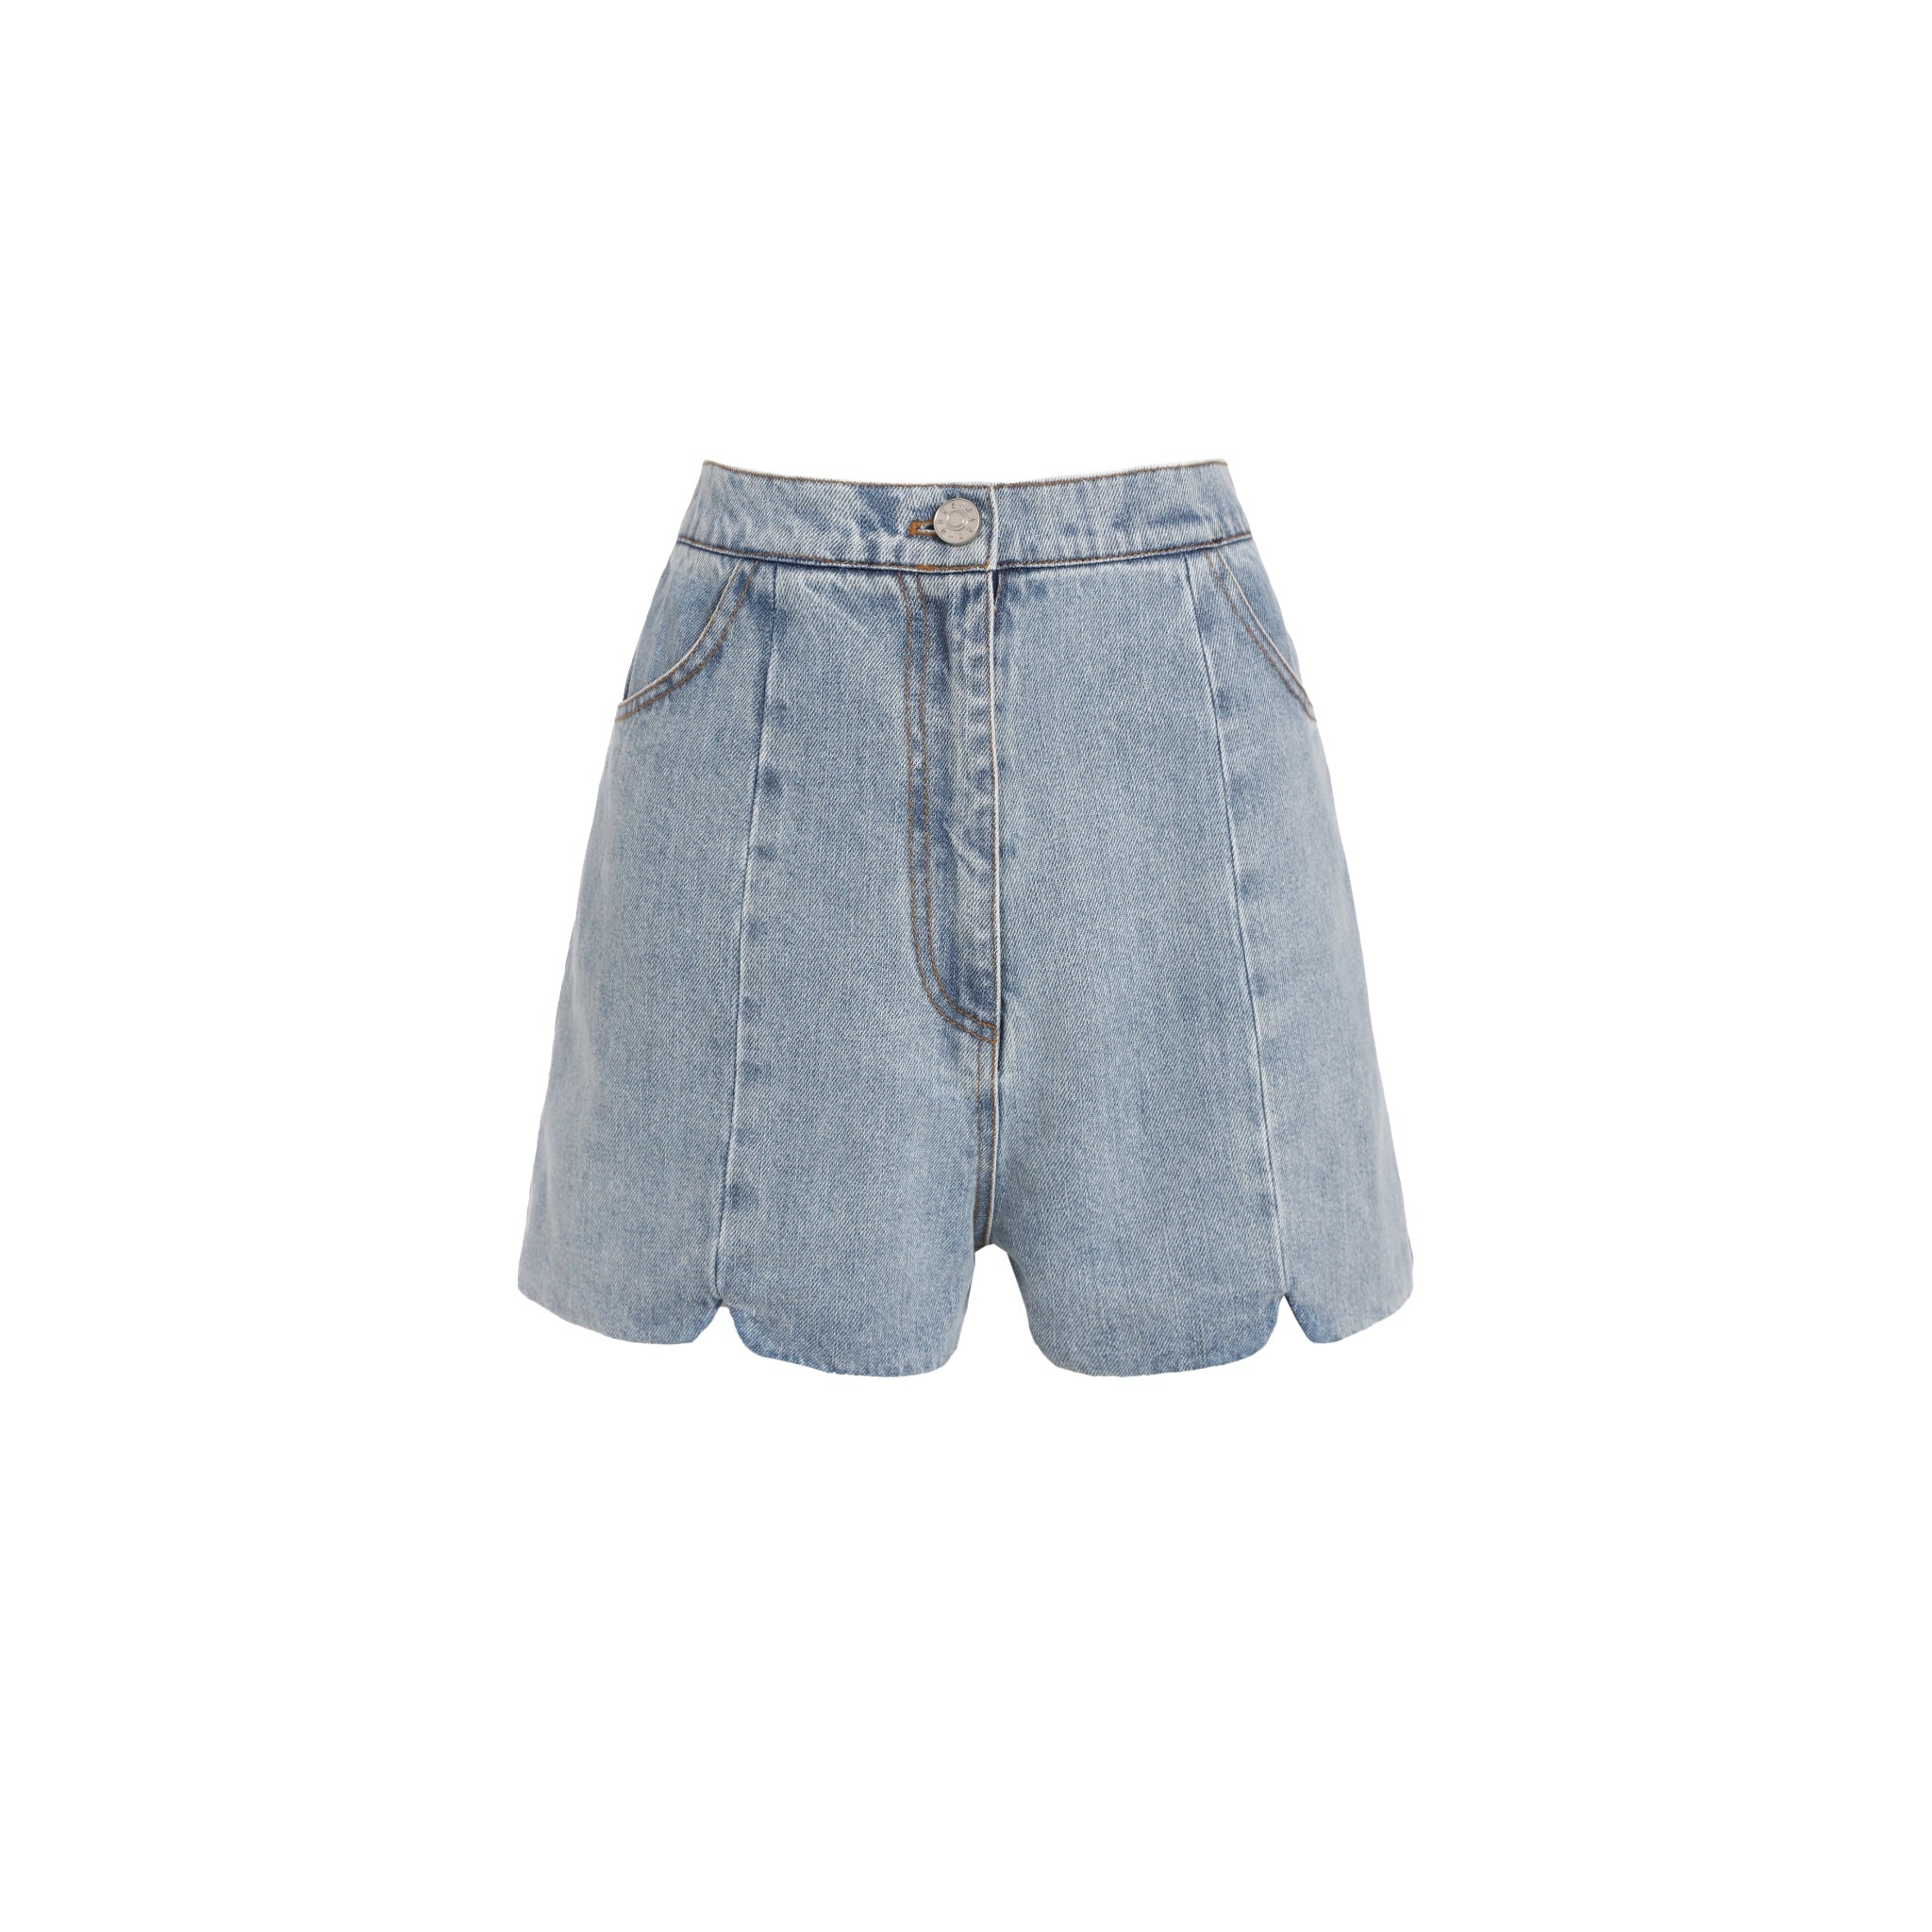 MARK GONG Denim Structured Slim Fit Shorts | MADA IN CHINA